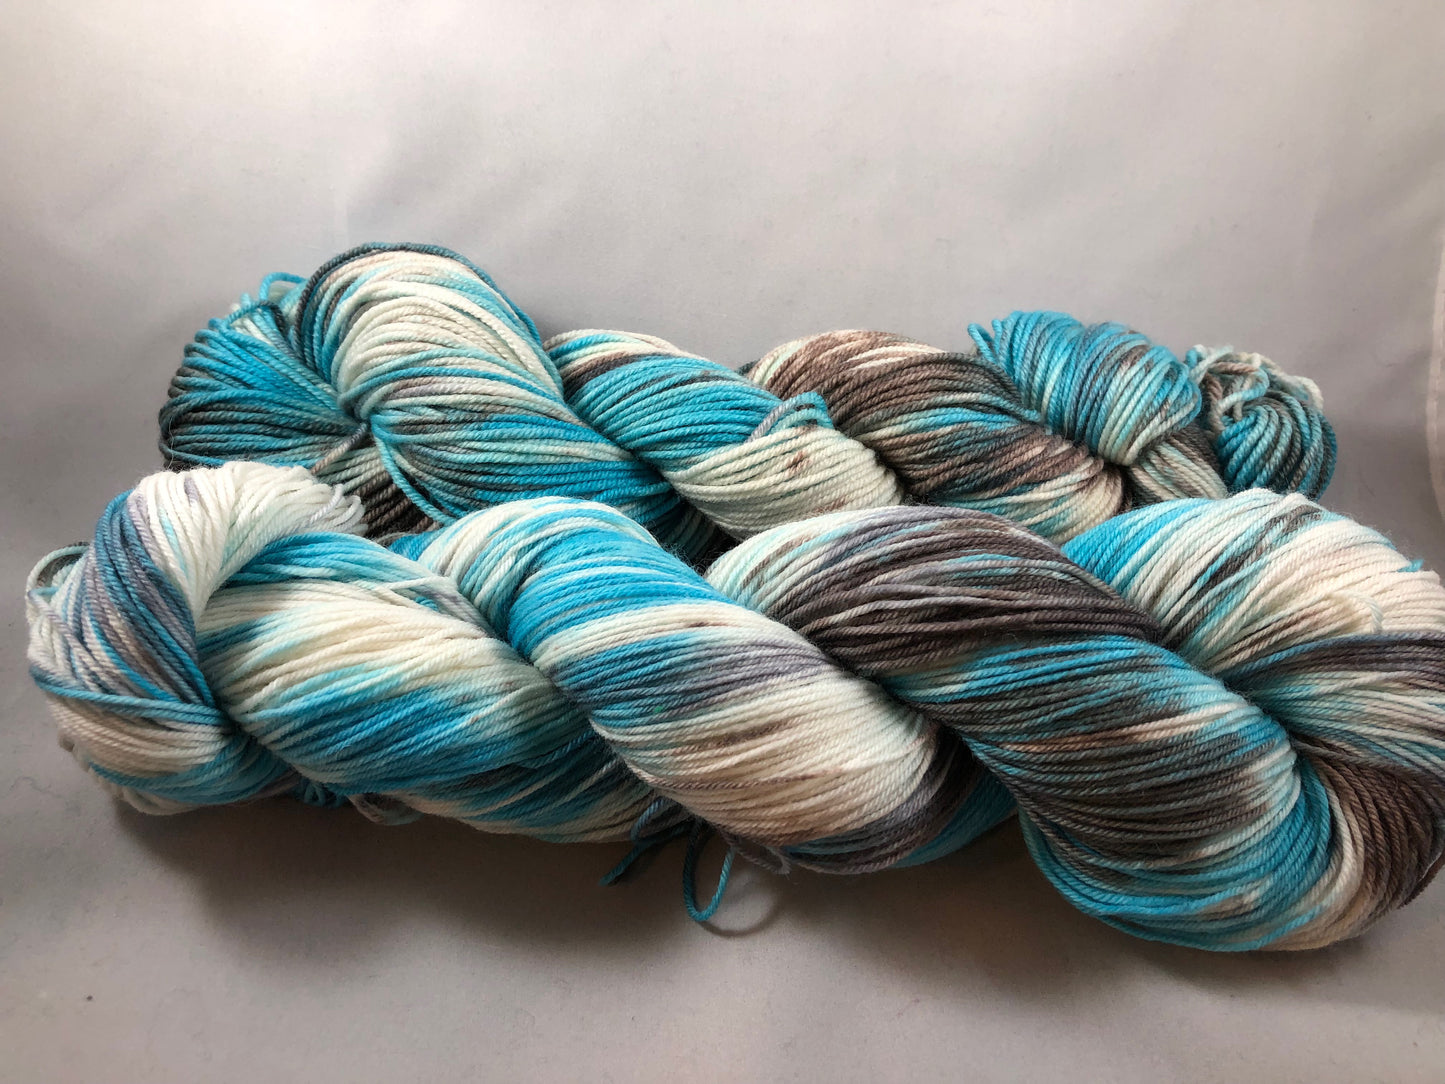 February - Dyed To Order